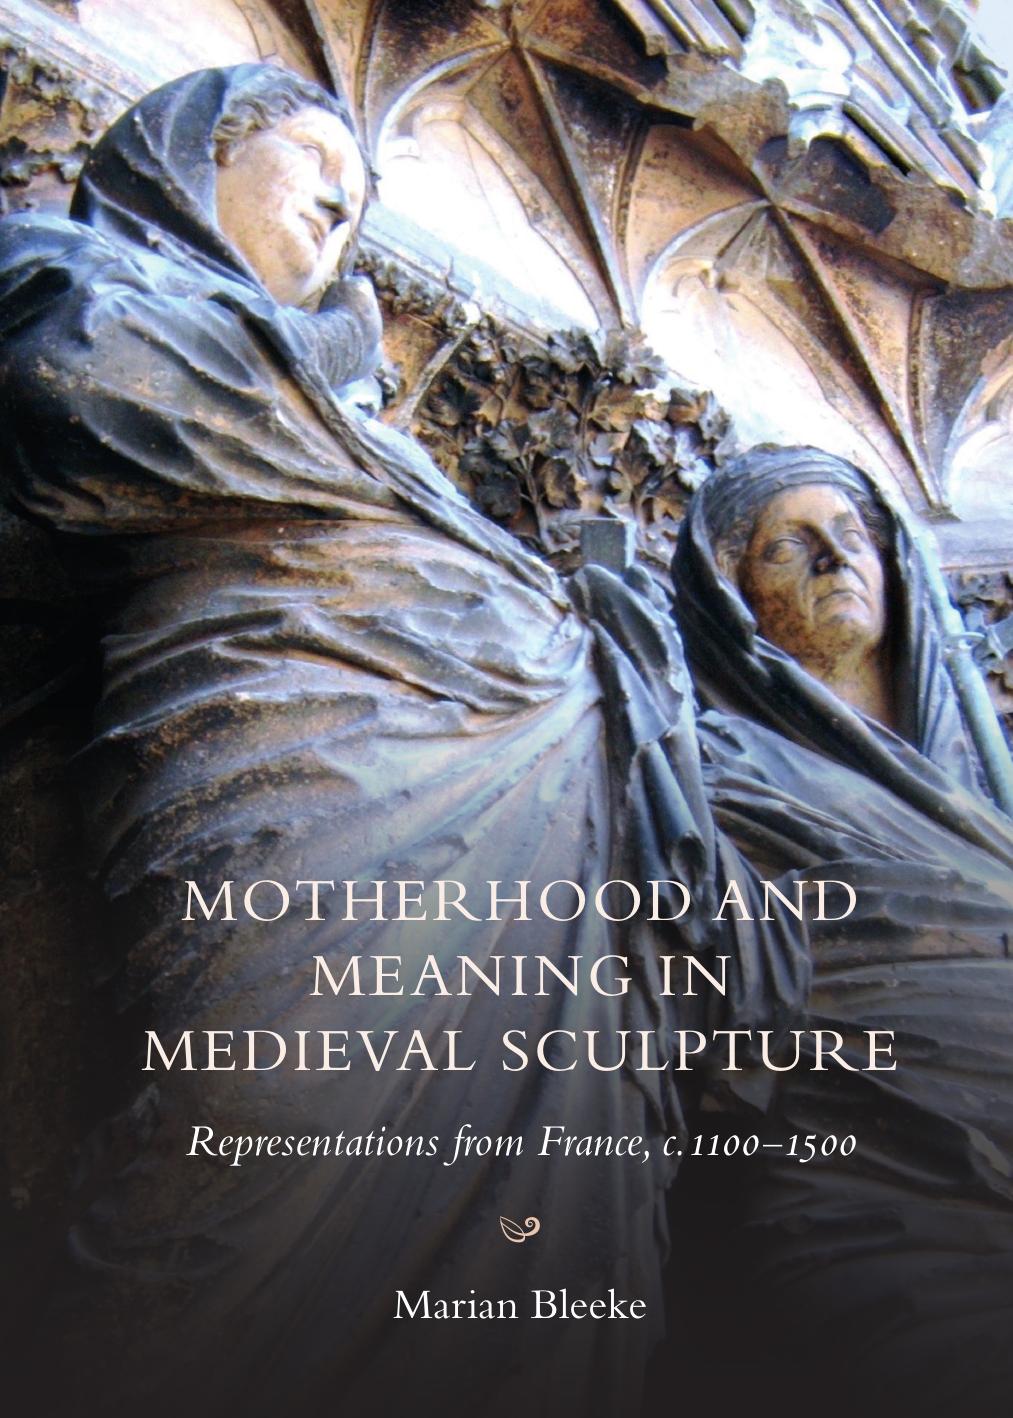 Motherhood and Meaning in Medieval Sculpture: Representations from France, c. 1100-1500 by Marian Bleeke